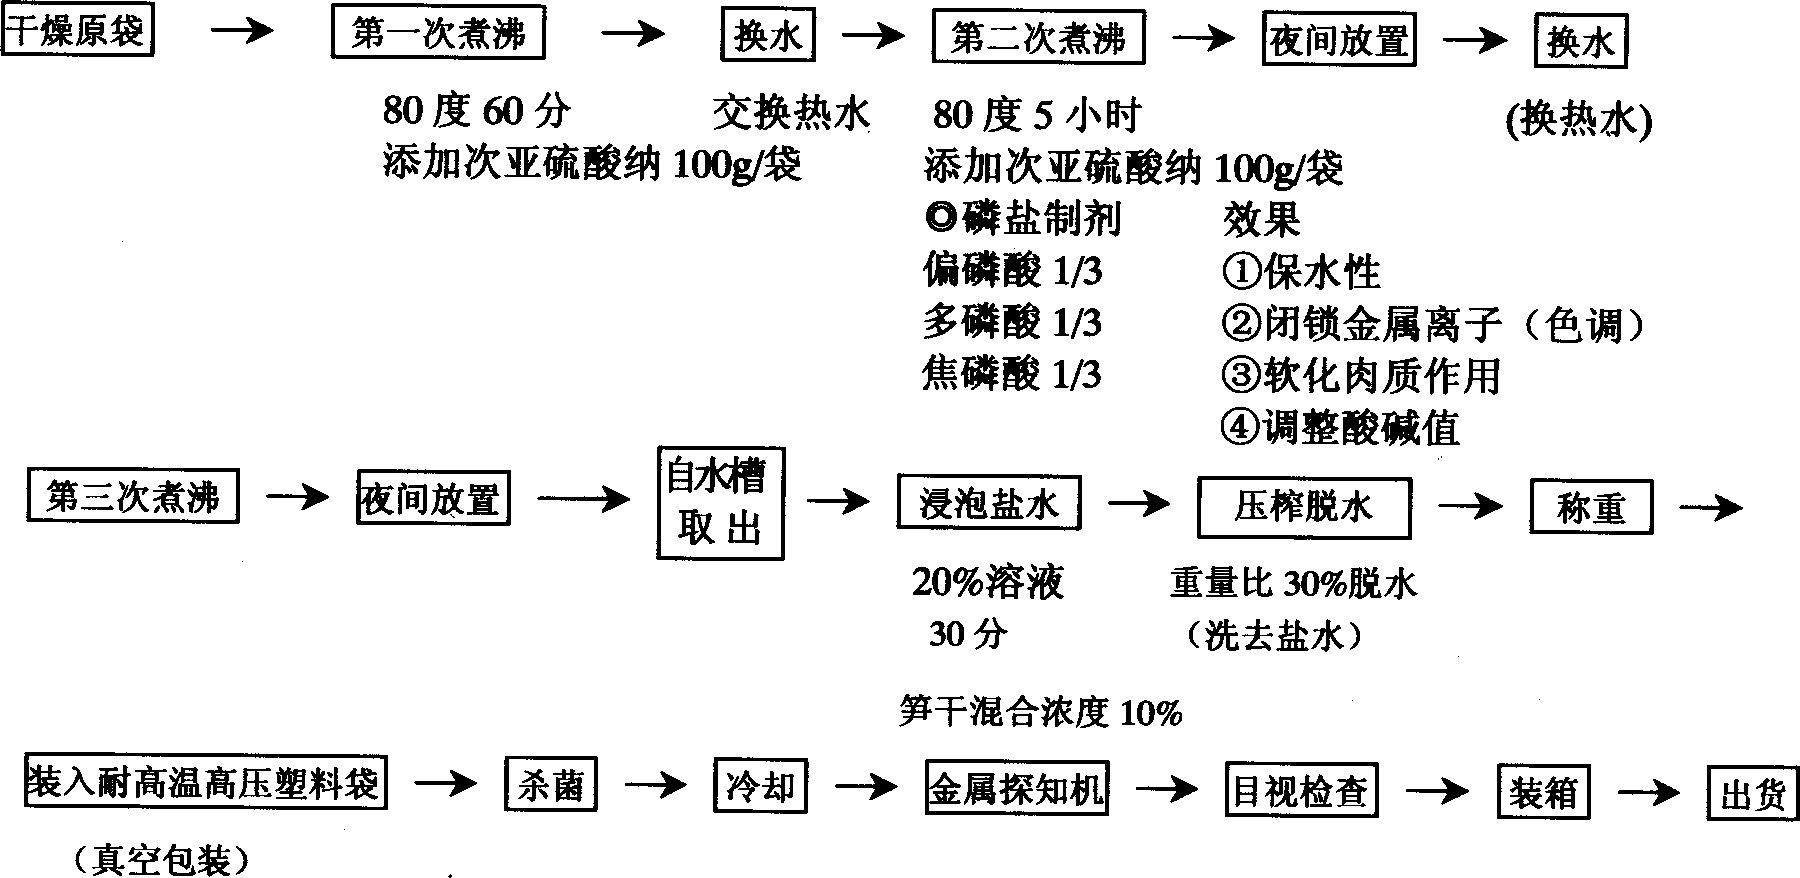 Production process of dry bamboo shoots in brine